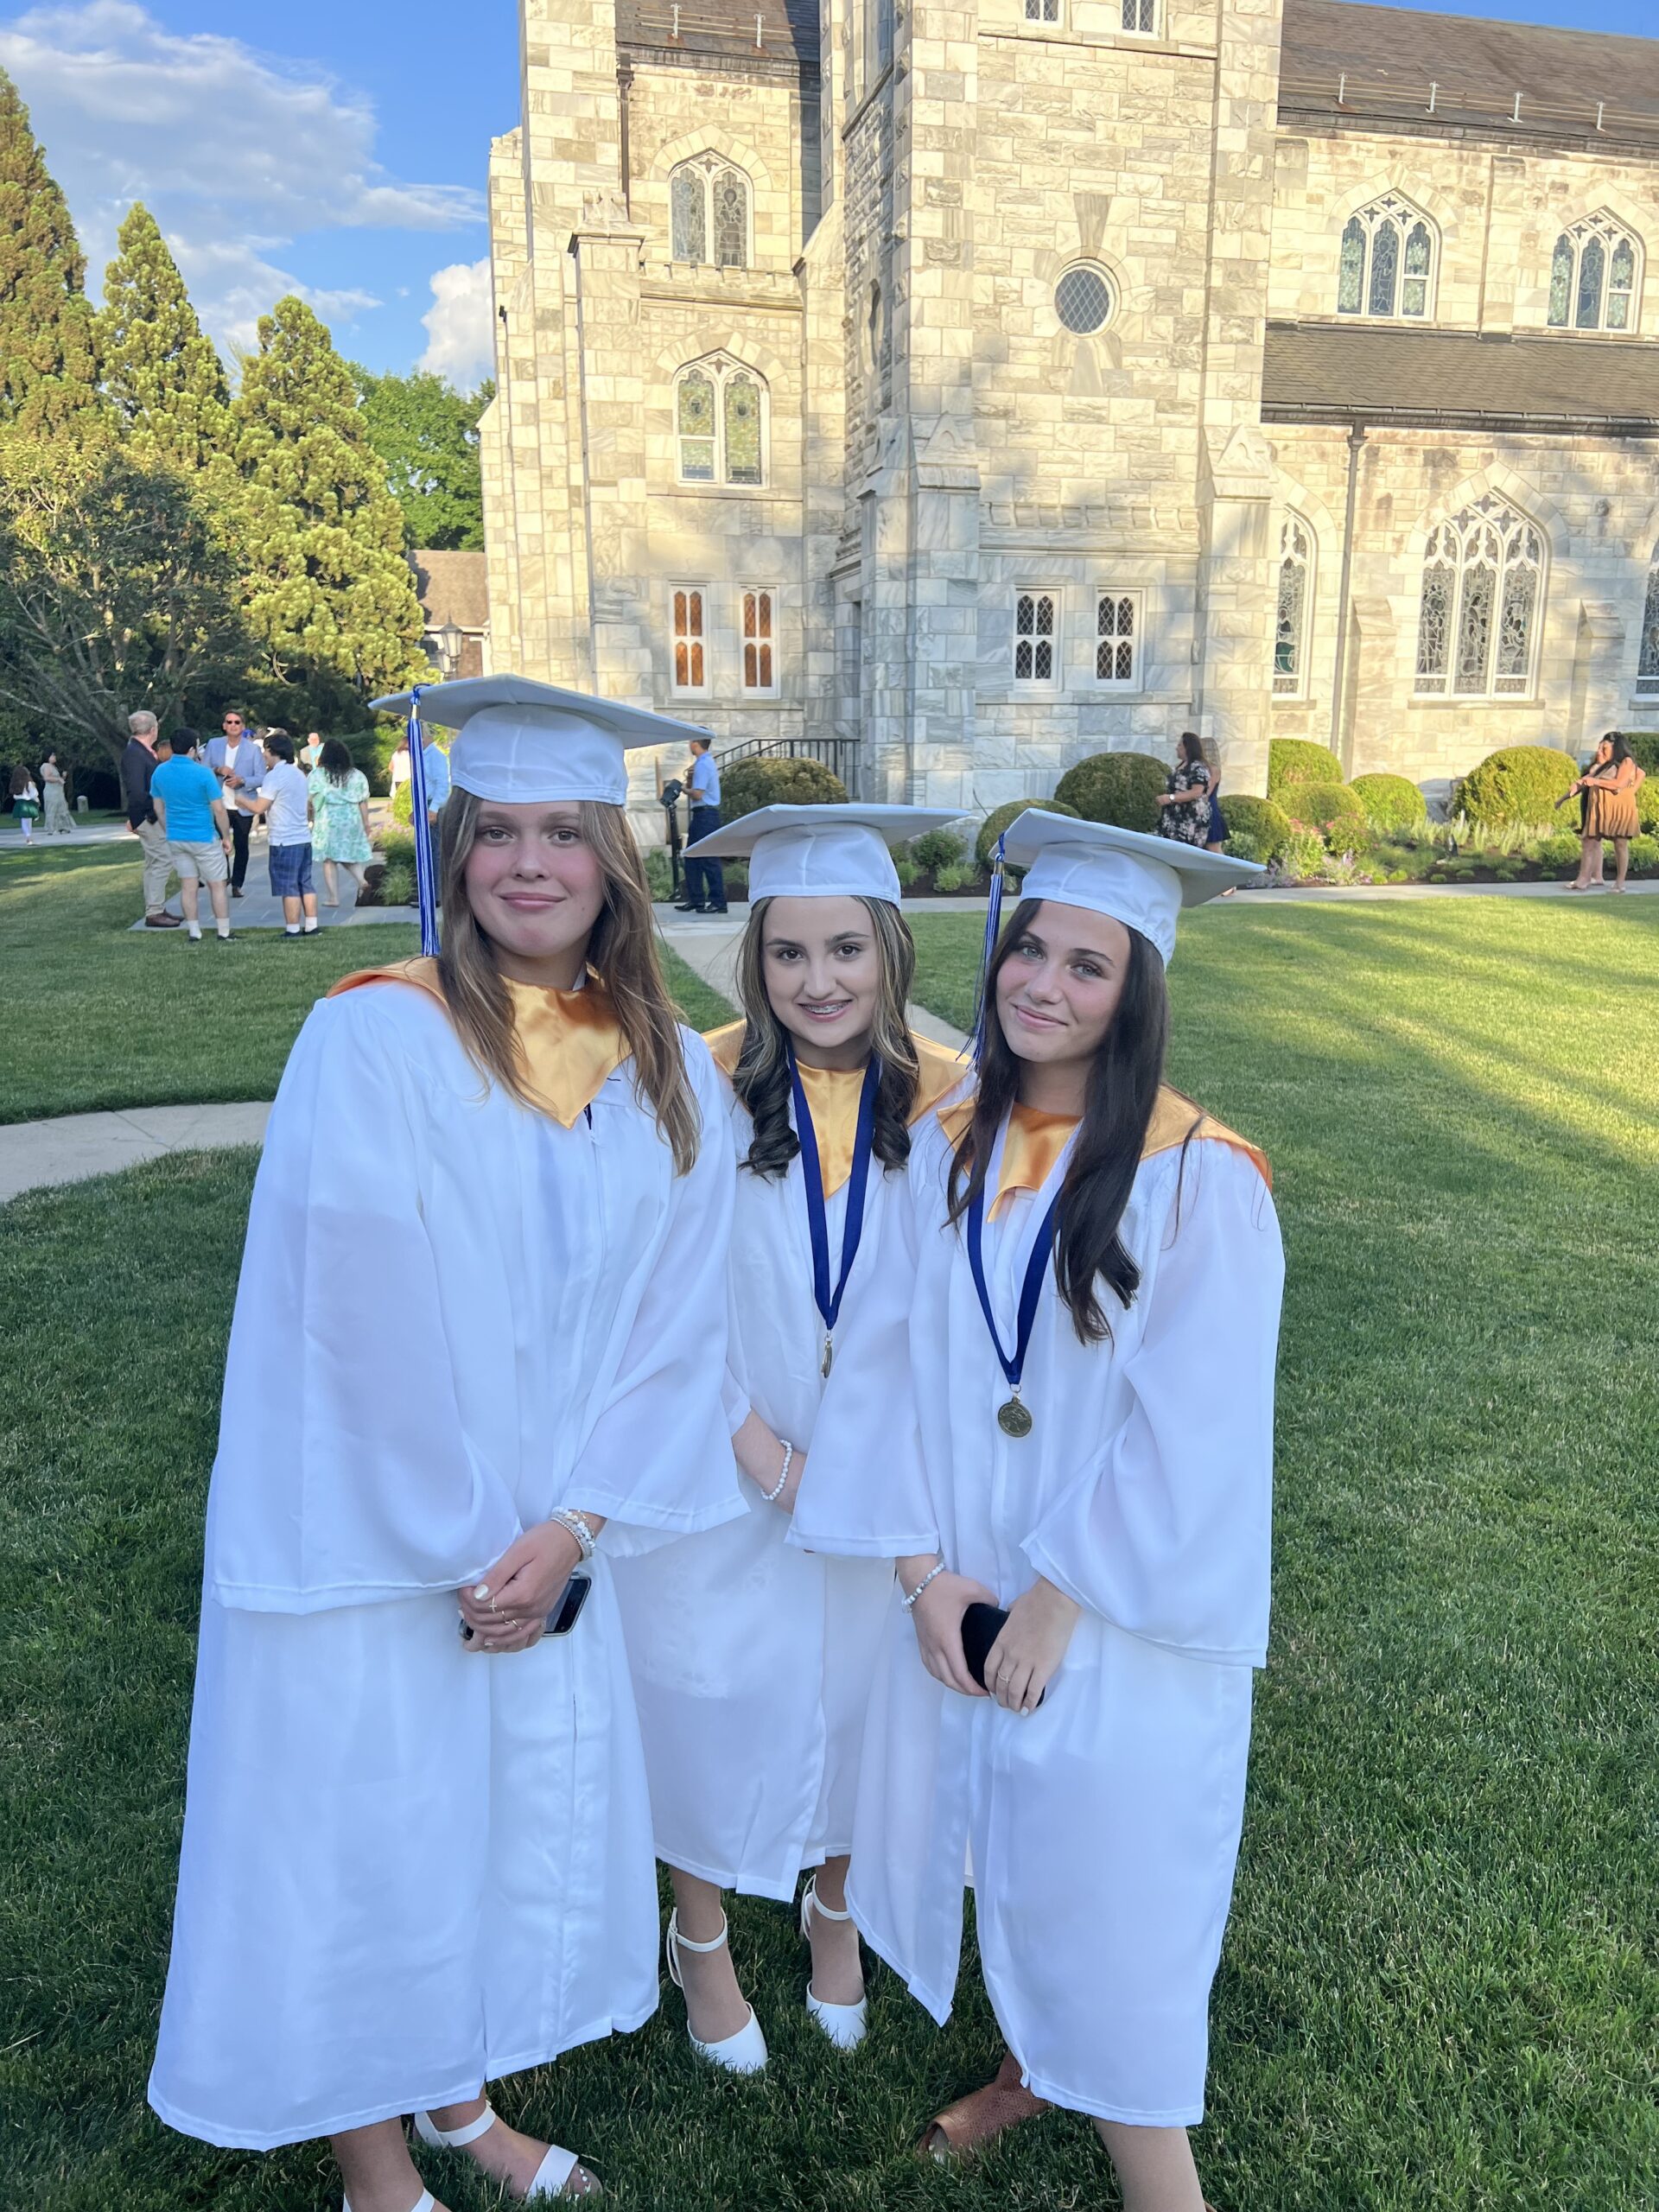 Our Lady of the Hamptons School students, from left,  Ava Phair, Sarah Hoffman and Jenna DiDomenico were among those who received their diplomas during a commencement ceremony at the Basilica Parish of Sacred Hearts of Jesus and Mary recently. COURTESY OUR LADY OF THE HAMPTONS SCHOOL